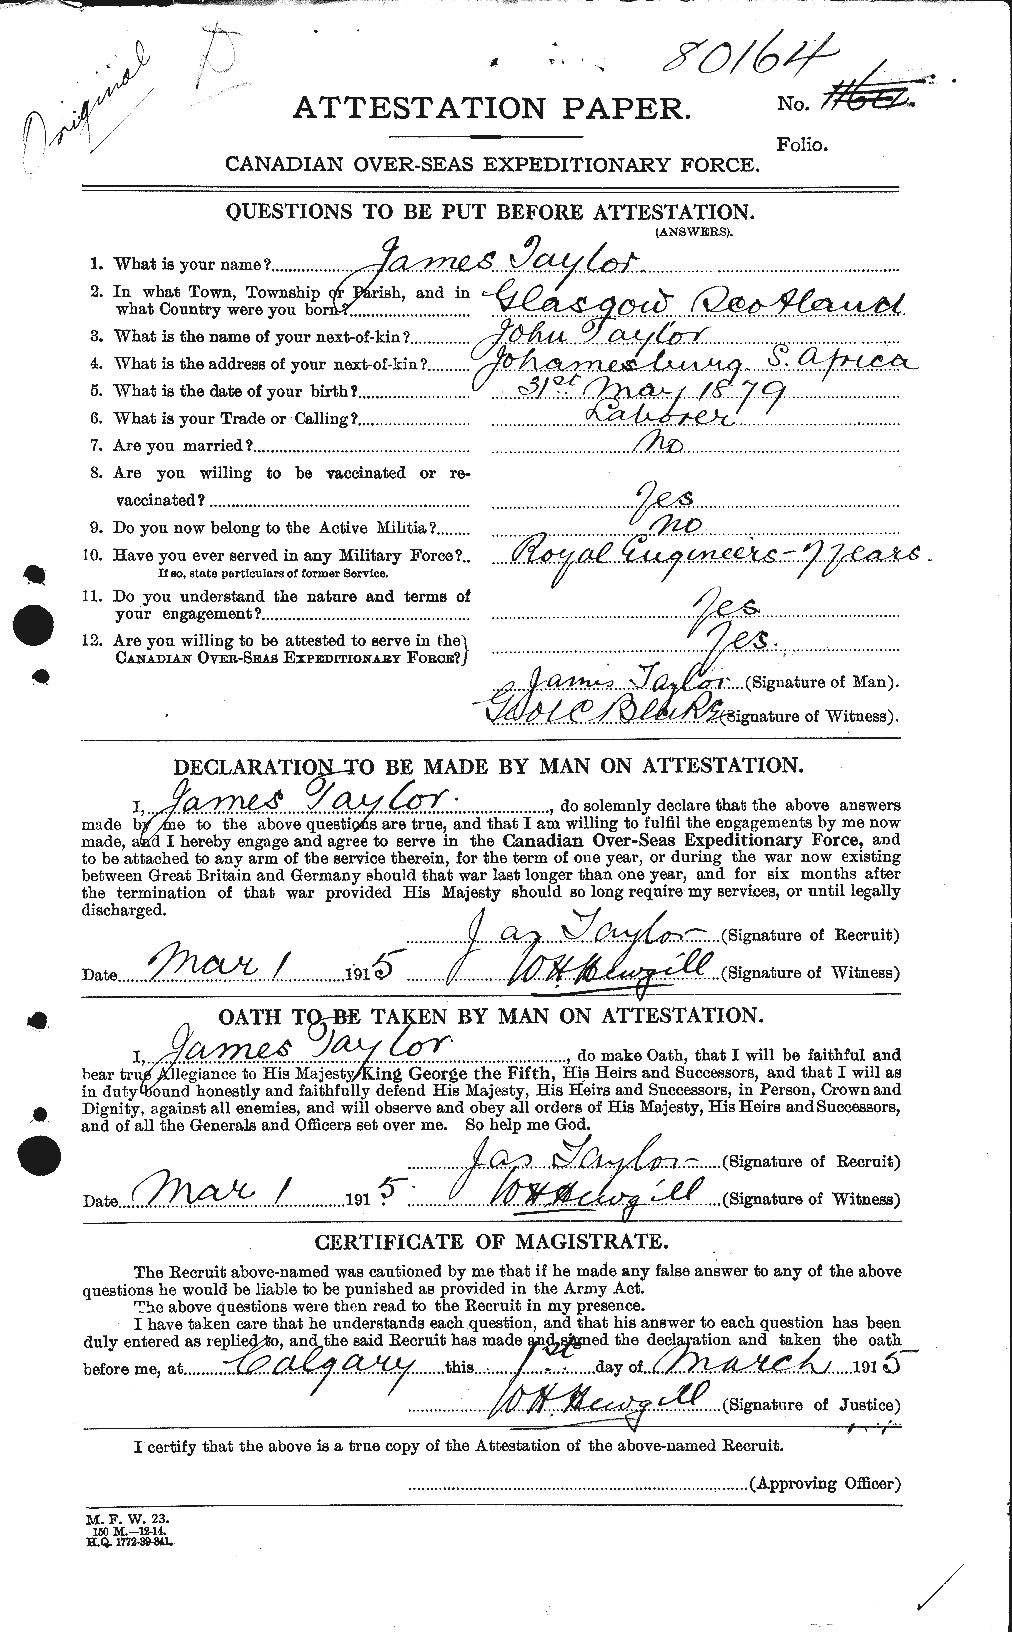 Personnel Records of the First World War - CEF 626682a